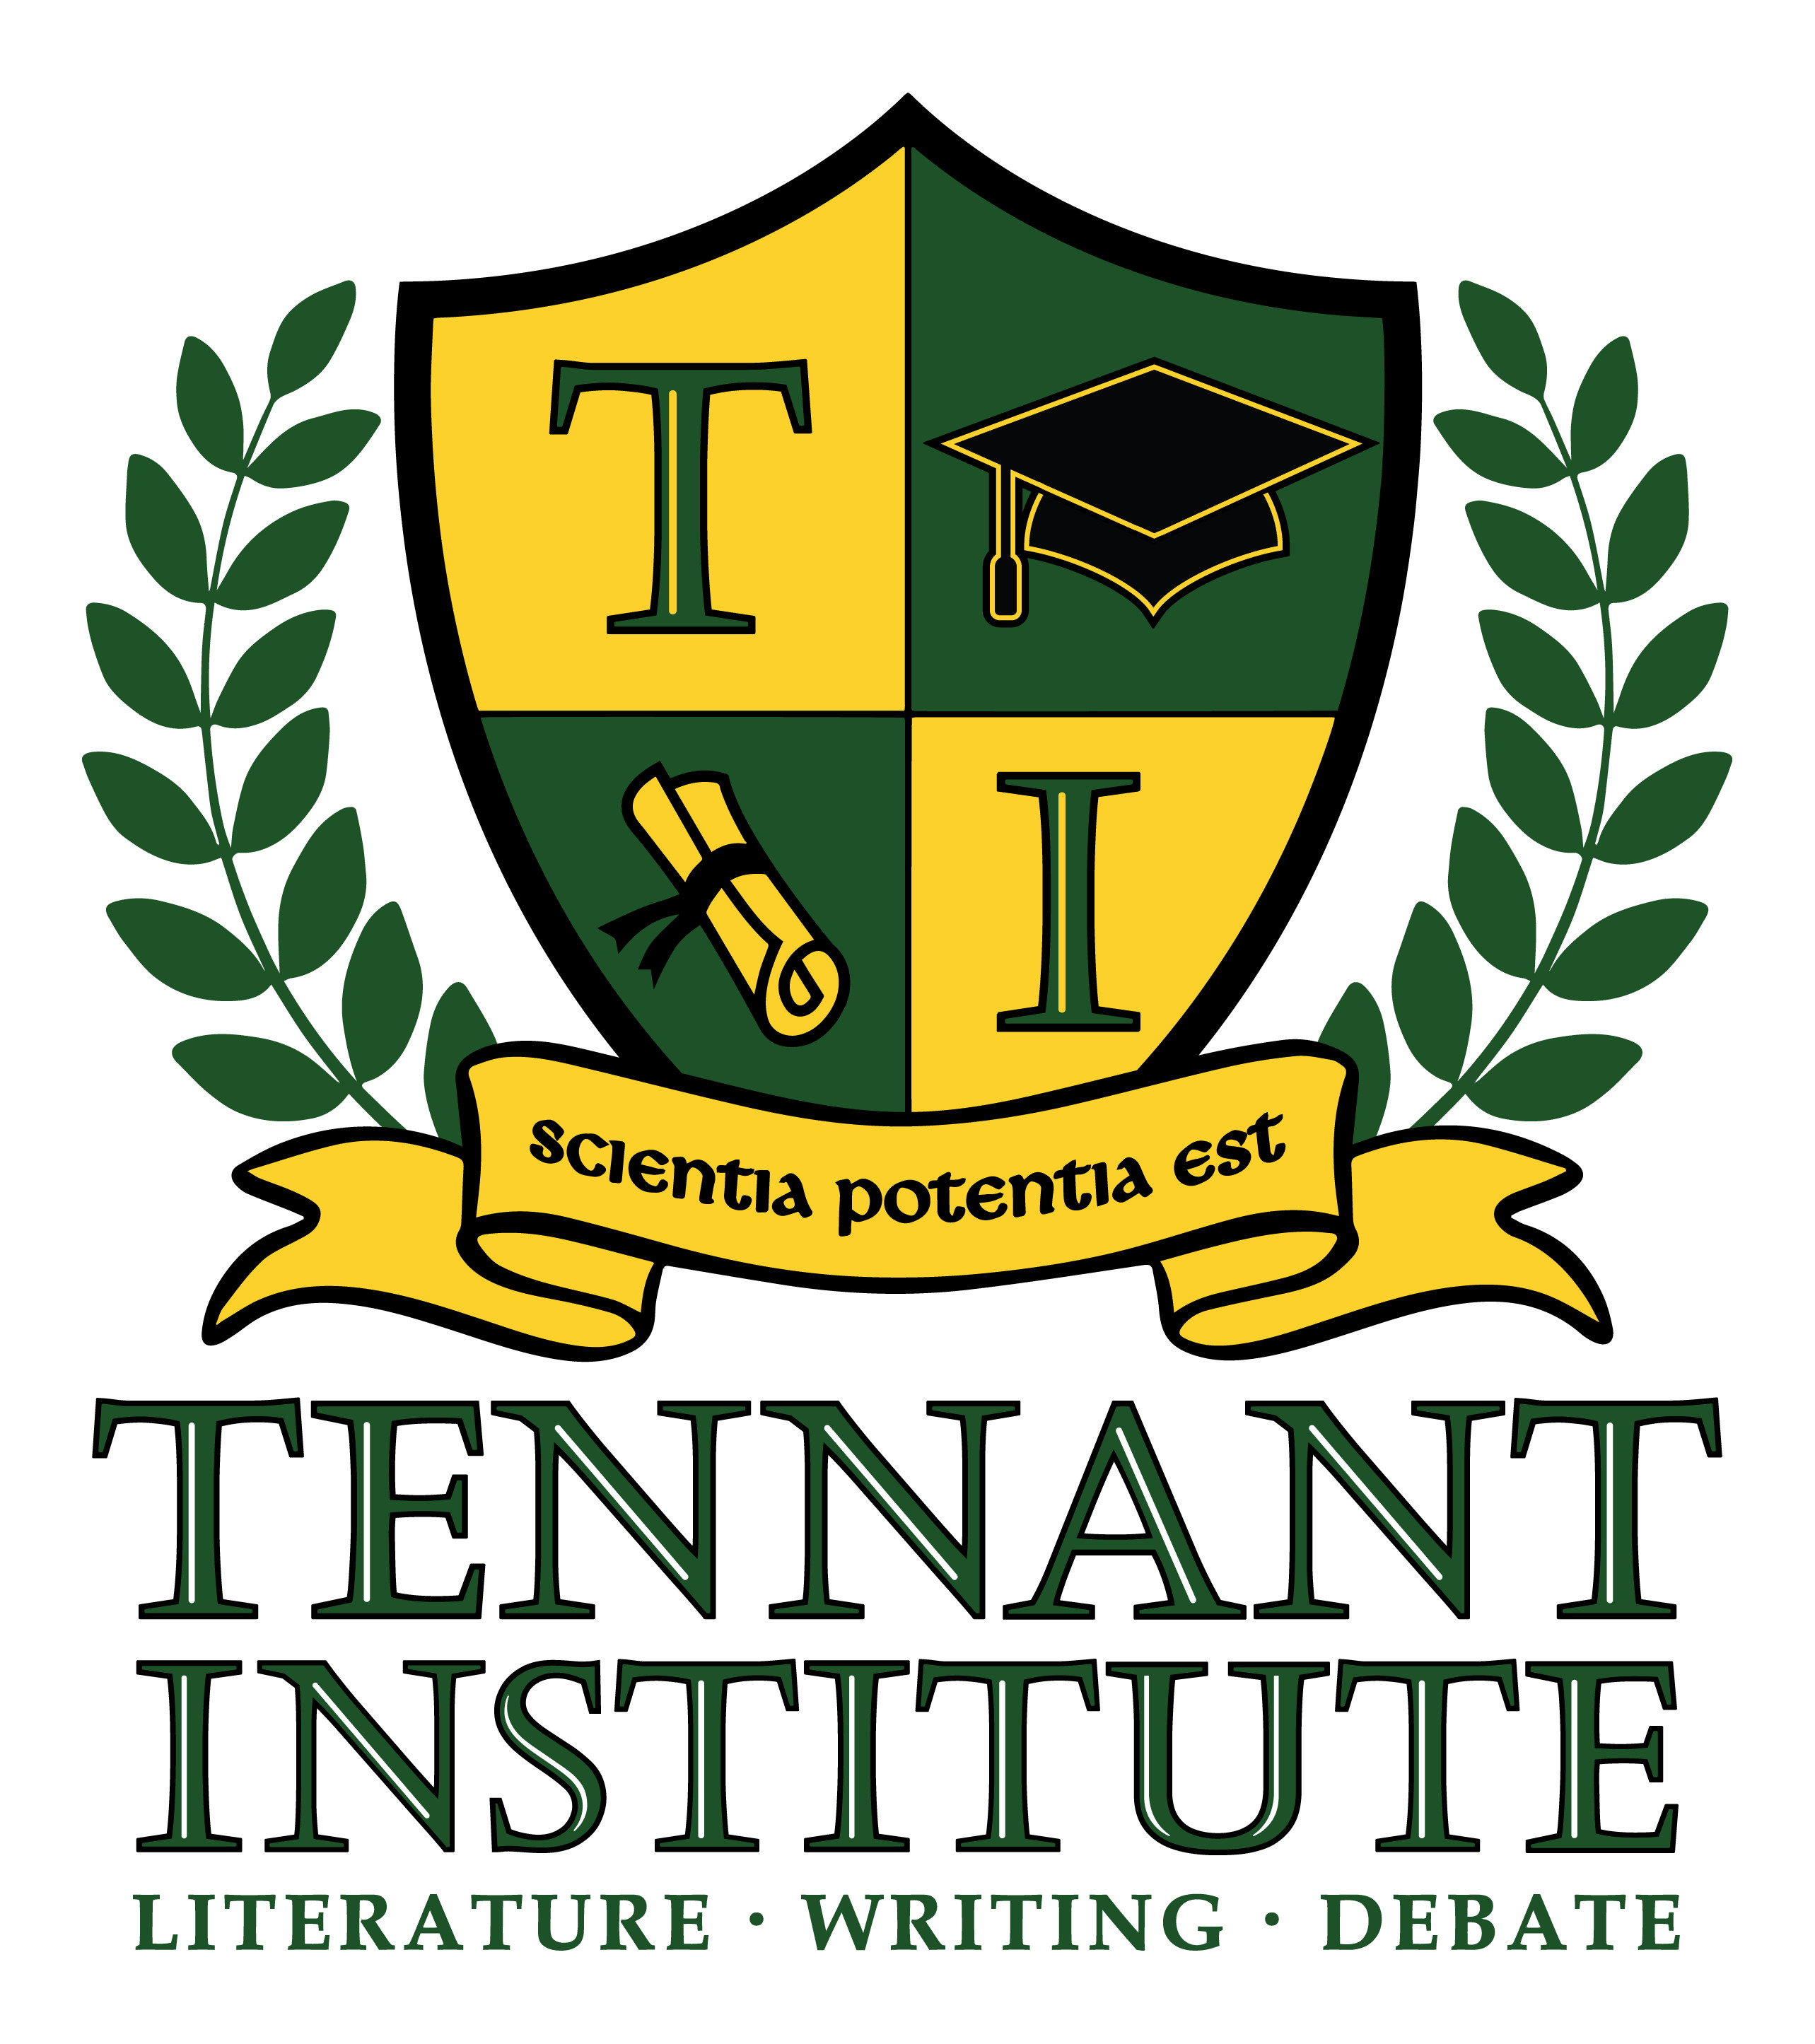 TI Gifted English Institute